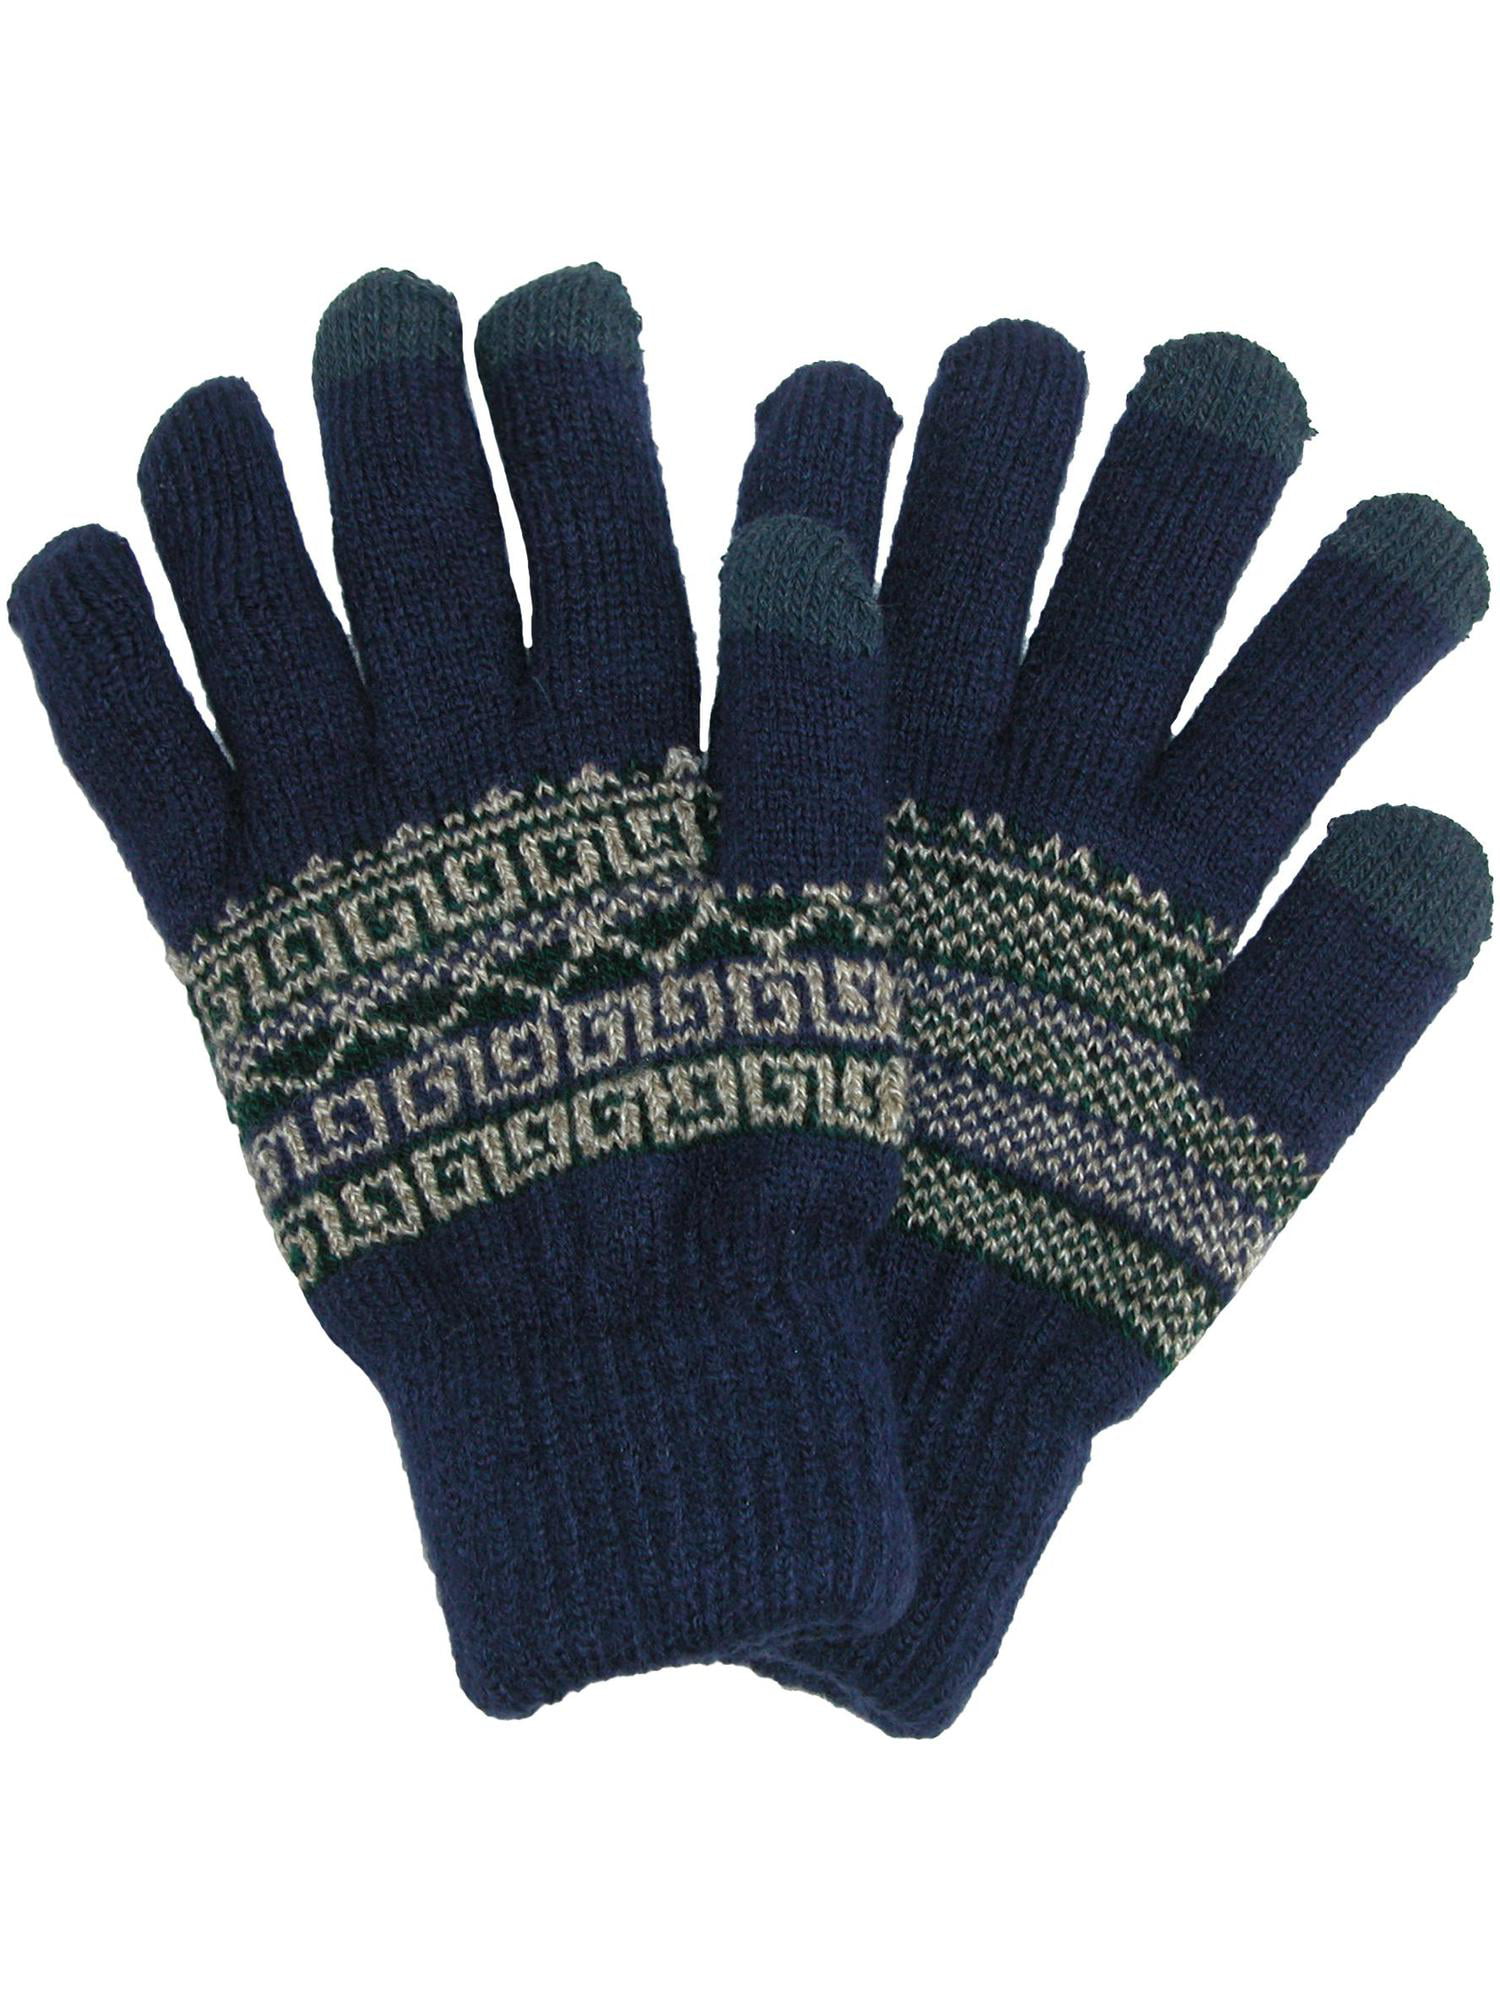 Driving Lightweight & Warm Thermal Magic Tech Gloves for Texting Cycling Touch Screen Winter Knit Gloves Running